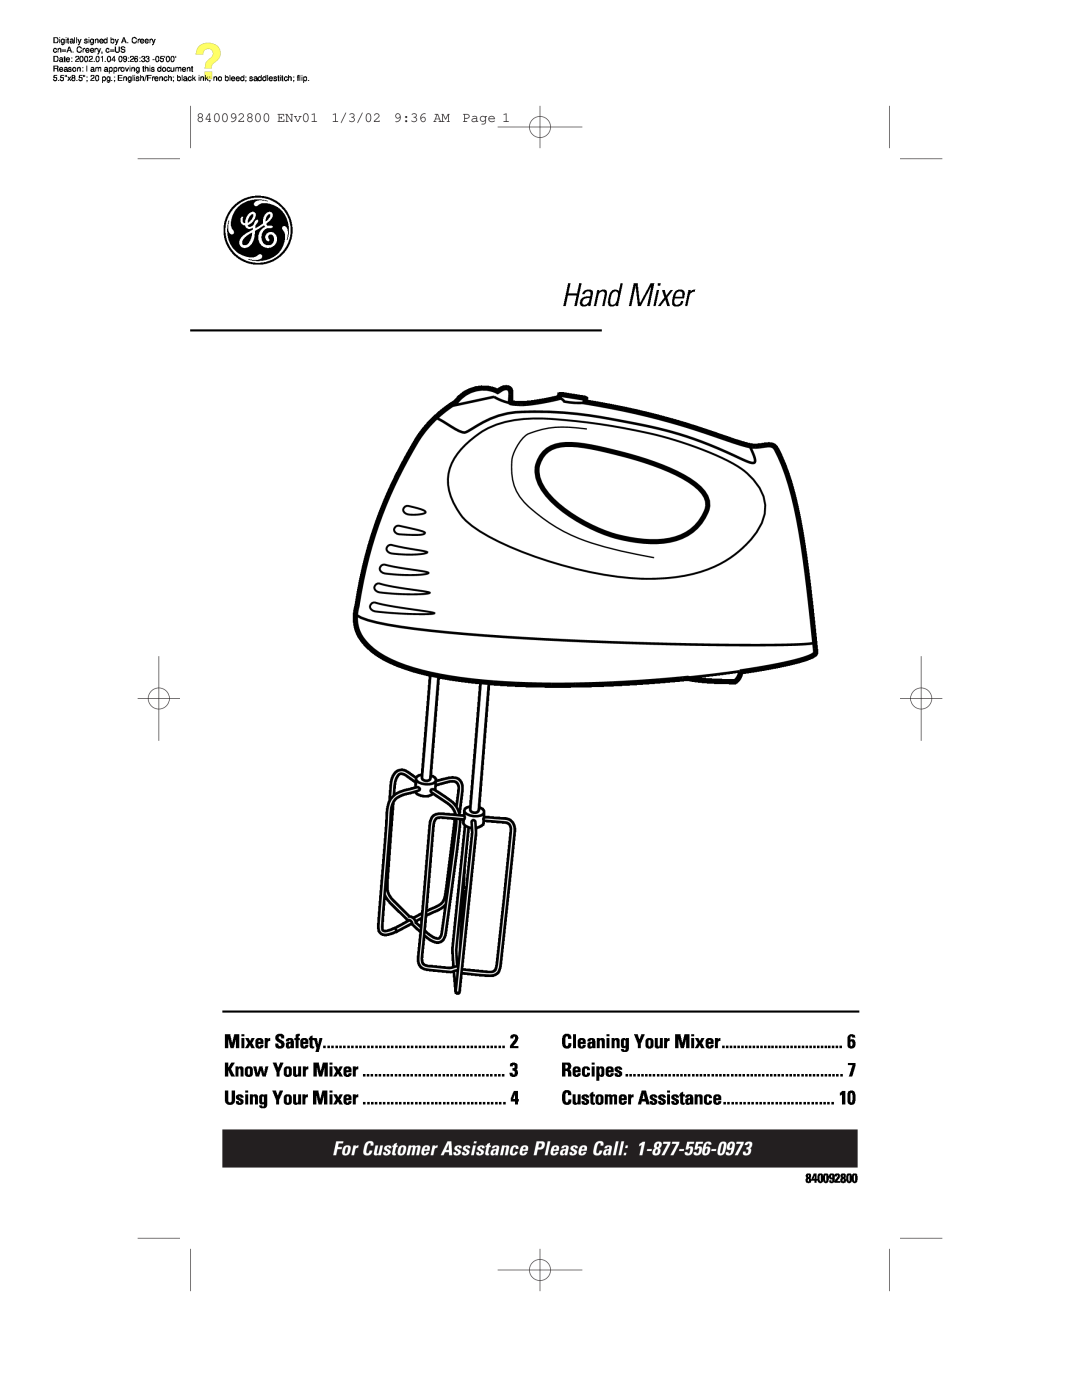 GE 106716 manual Hand Mixer, For Customer Assistance Please Call, Mixer Safety, Cleaning Your Mixer, Know Your Mixer 